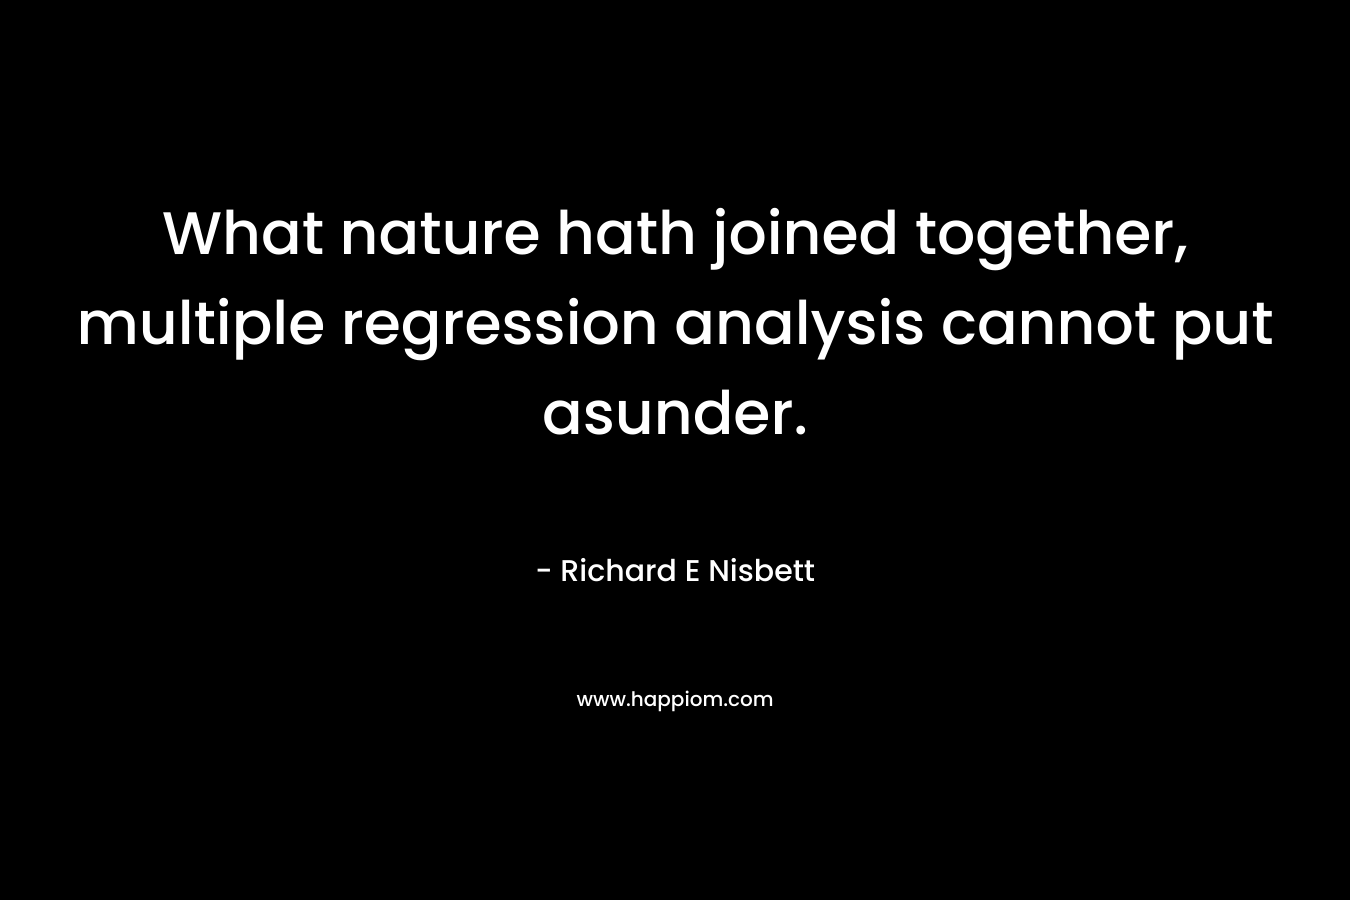 What nature hath joined together, multiple regression analysis cannot put asunder. – Richard E Nisbett